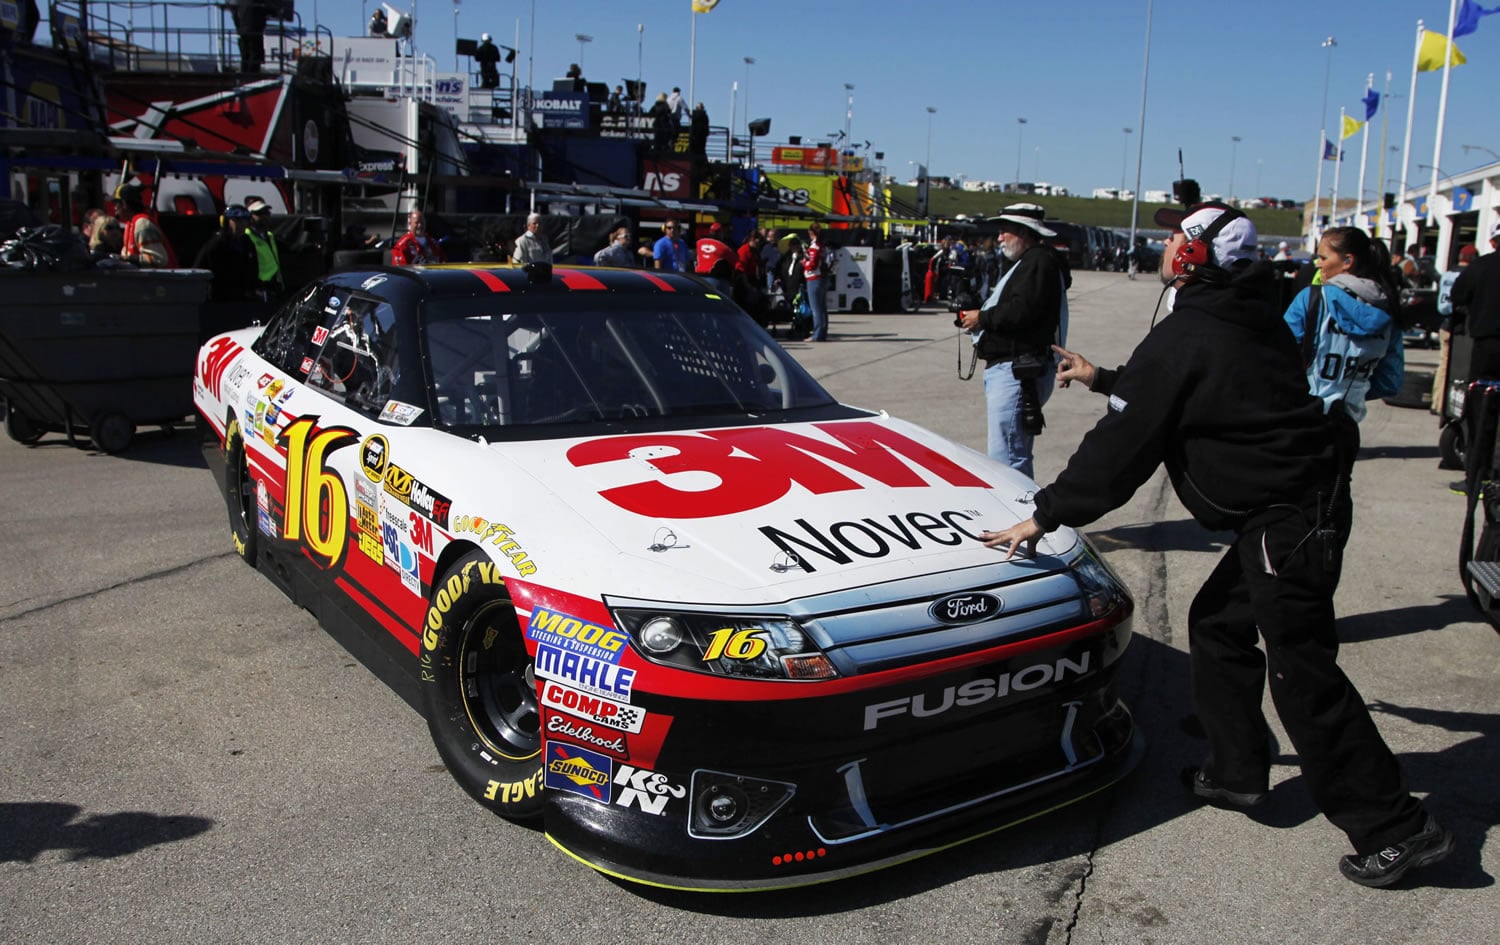 Greg Biffle (16) pulls out of the garage during practice for the NASCAR Sprint Cup Series auto race at Kansas Speedway in Kansas City, Kan., on Friday.